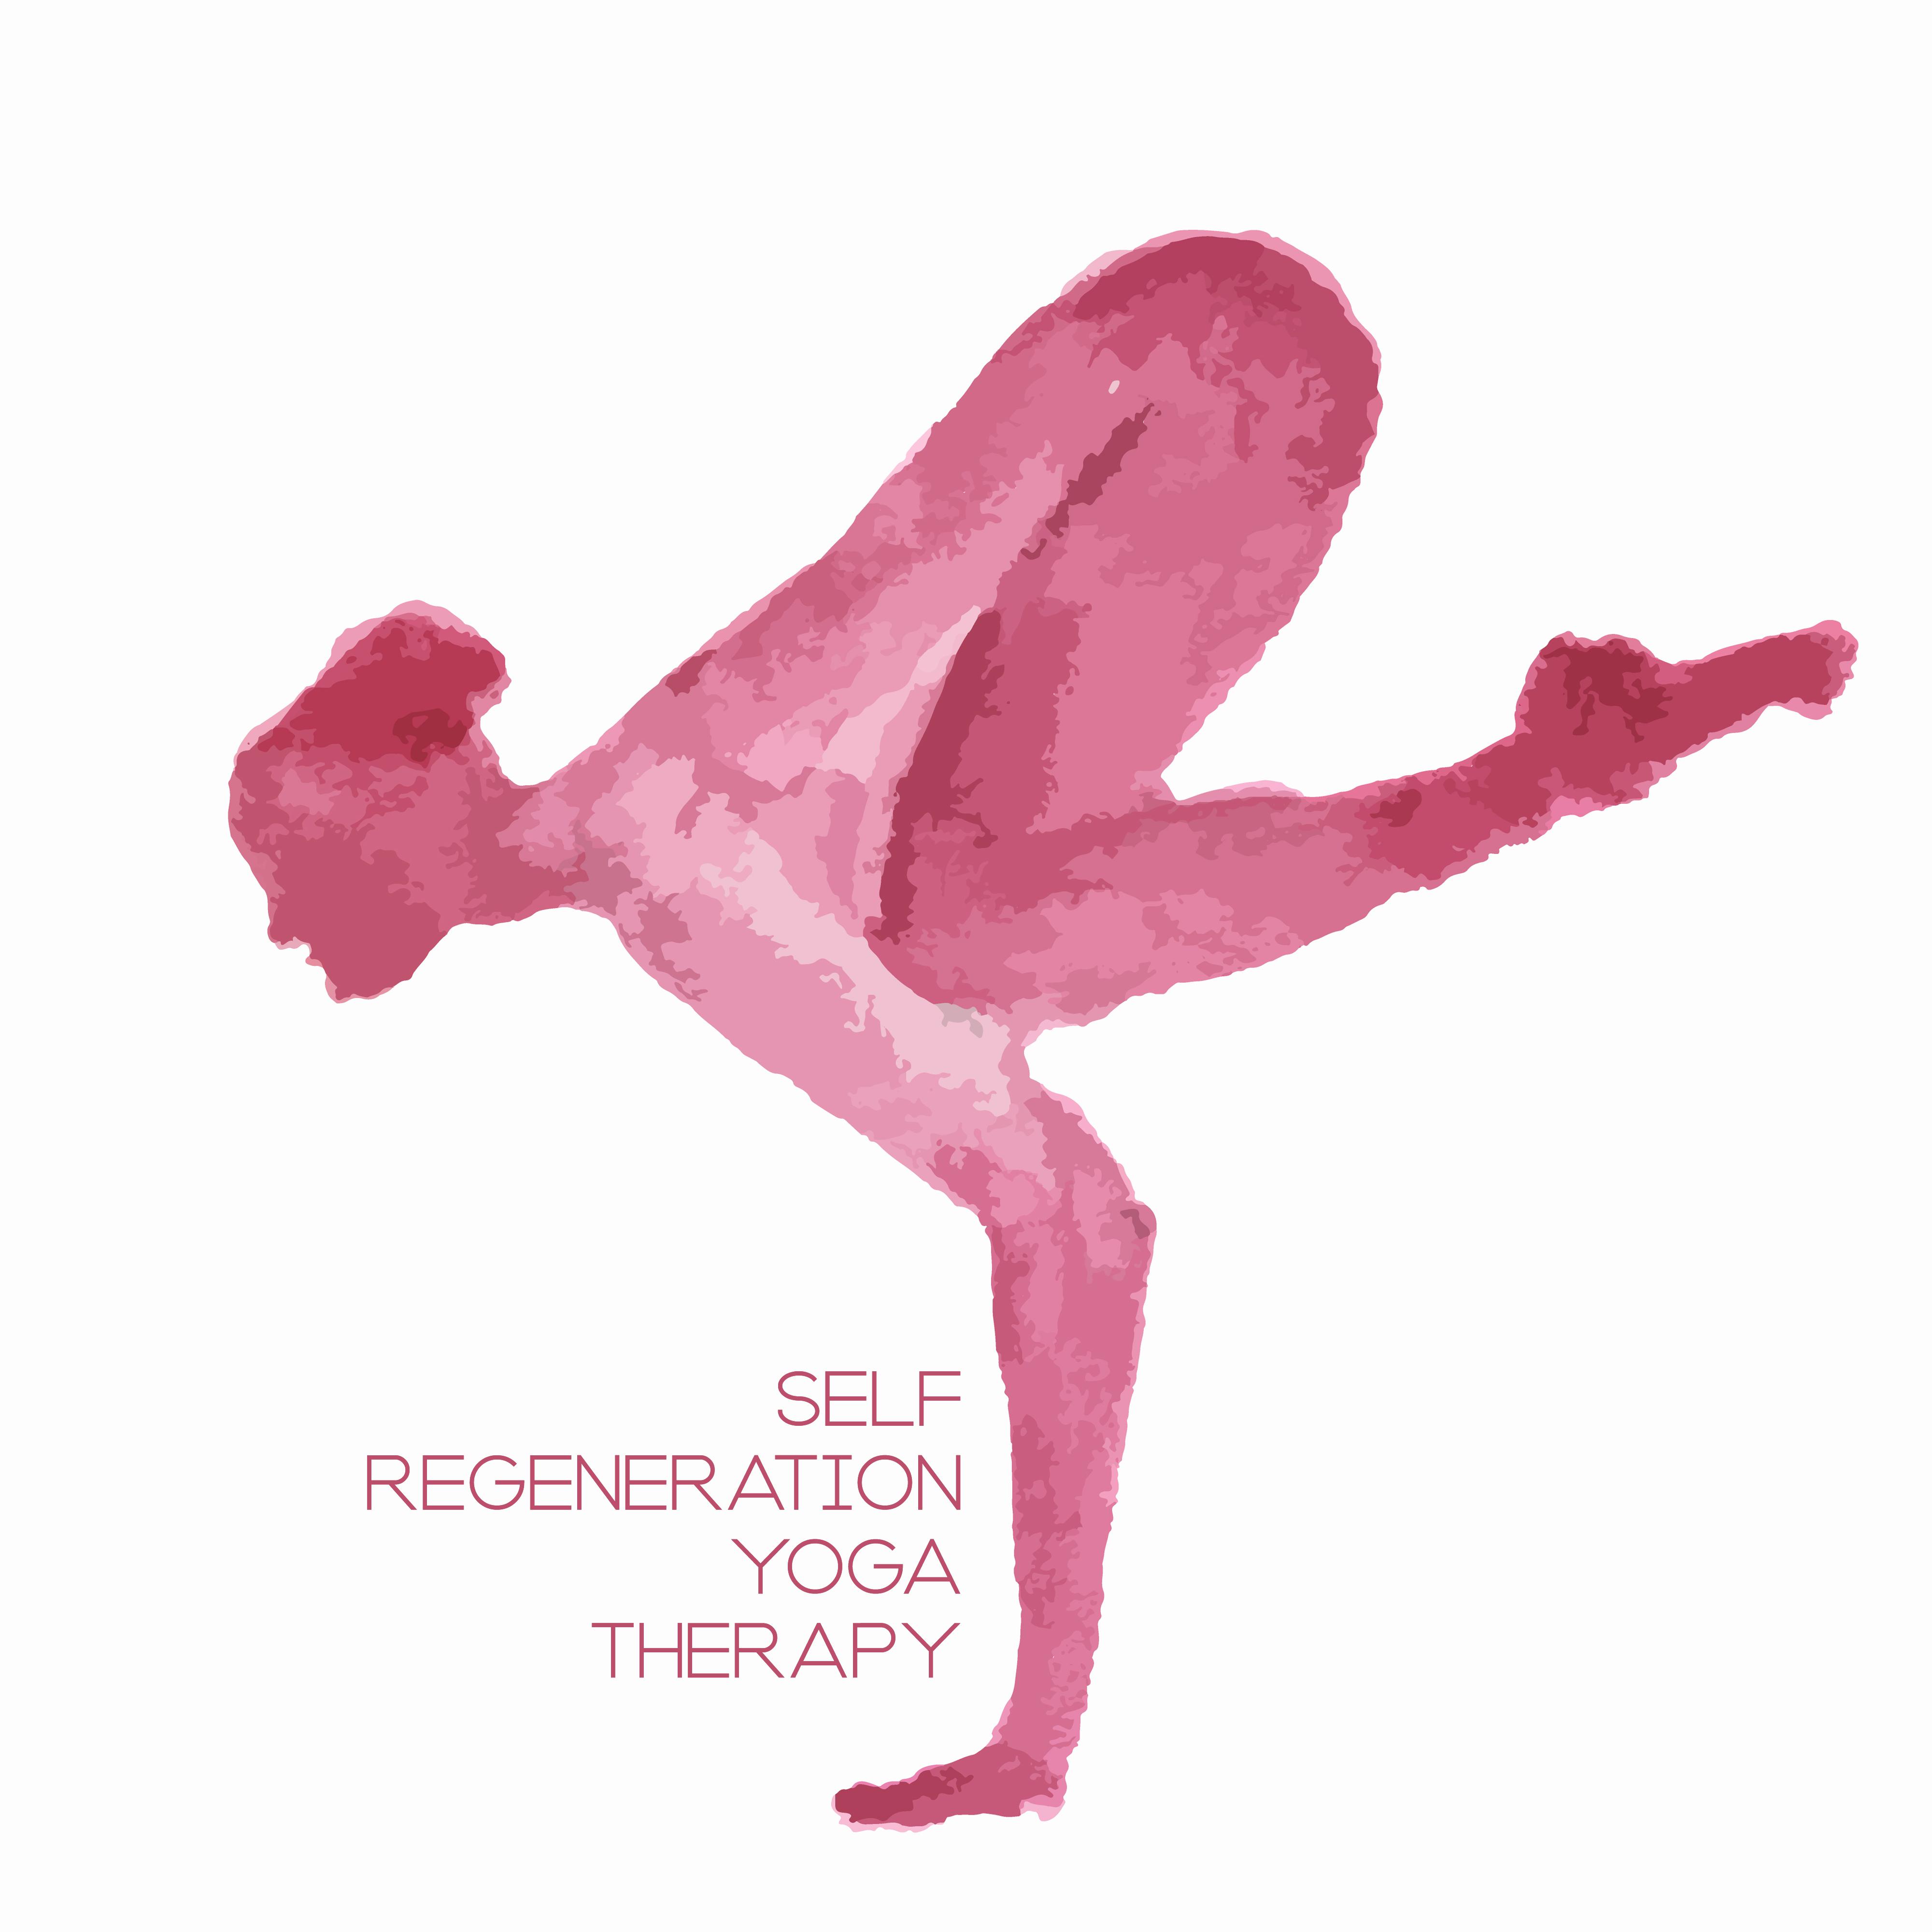 Self Regeneration Yoga Therapy: 2019 New Age Music Selection for Meditation & Relaxation, Deep Comfort Songs, Self Regeneration, Vital Energy Increase, Healing Therapy